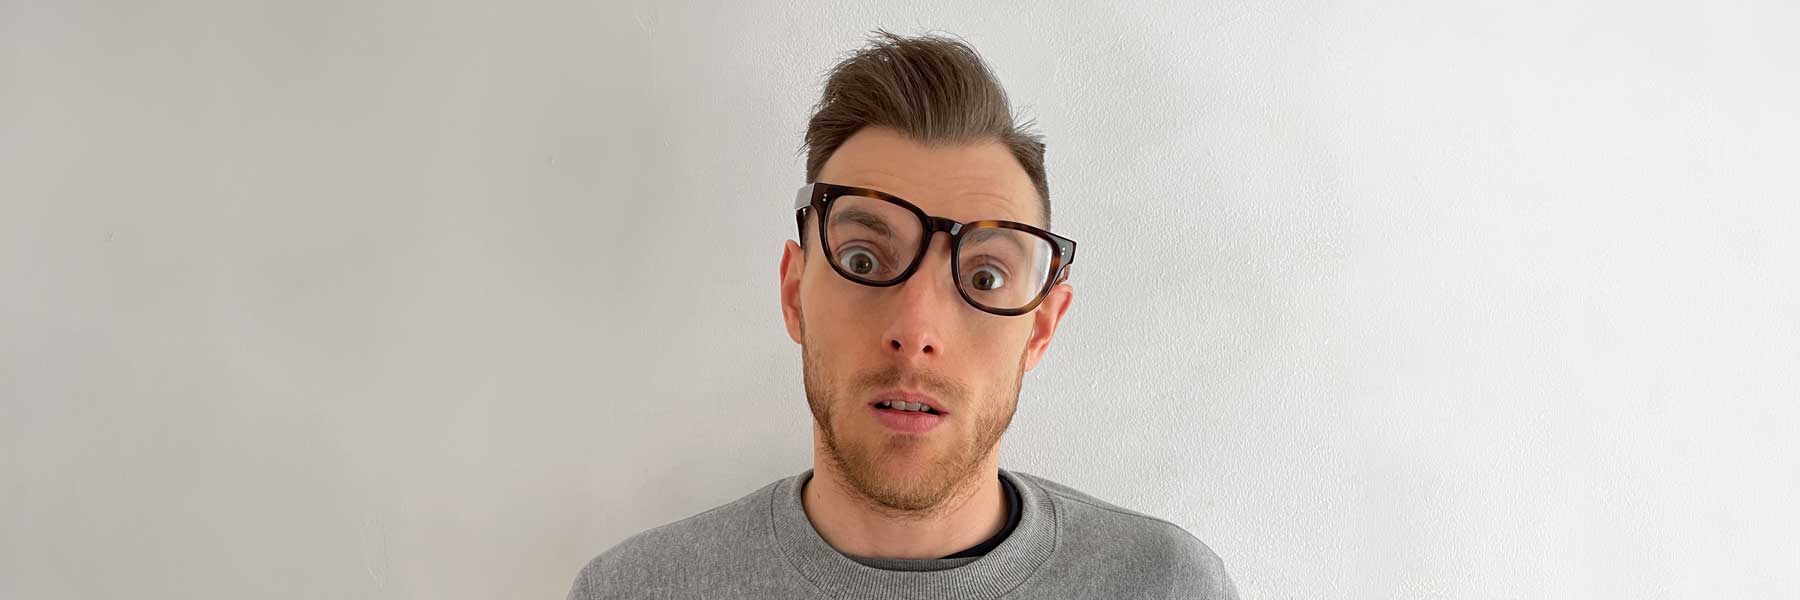 Would your vision become worse if you wear large-sized glasses often?